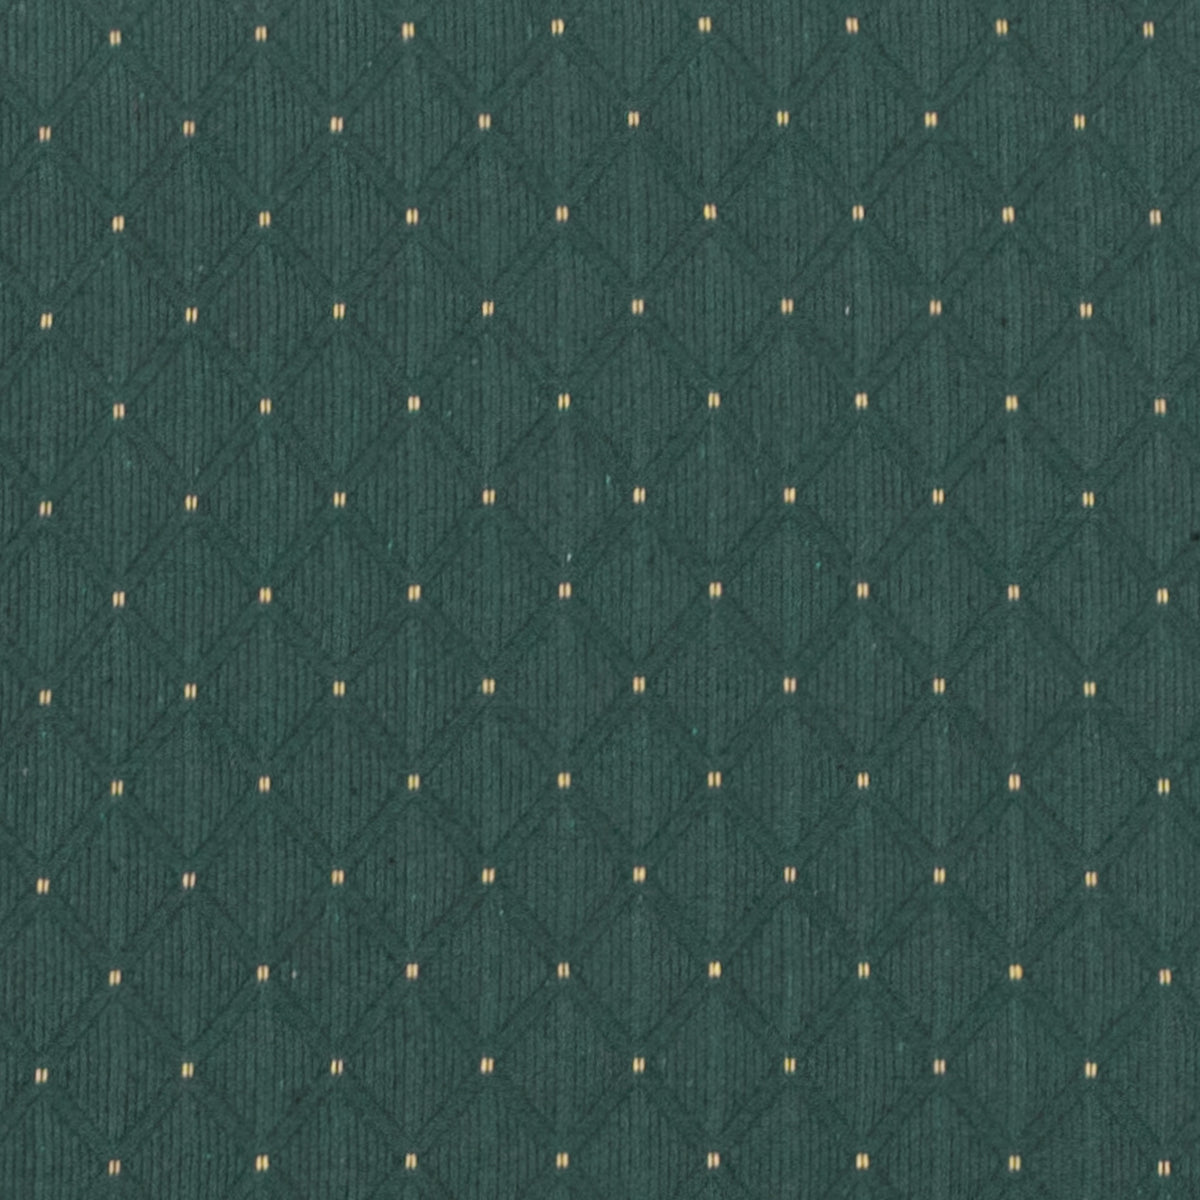 Hunter Green Dot Patterned Fabric/Gold Vein Frame |#| EMB 21inchW Church Chair in Hunter Green Dot Patterned Fabric with Book Rack